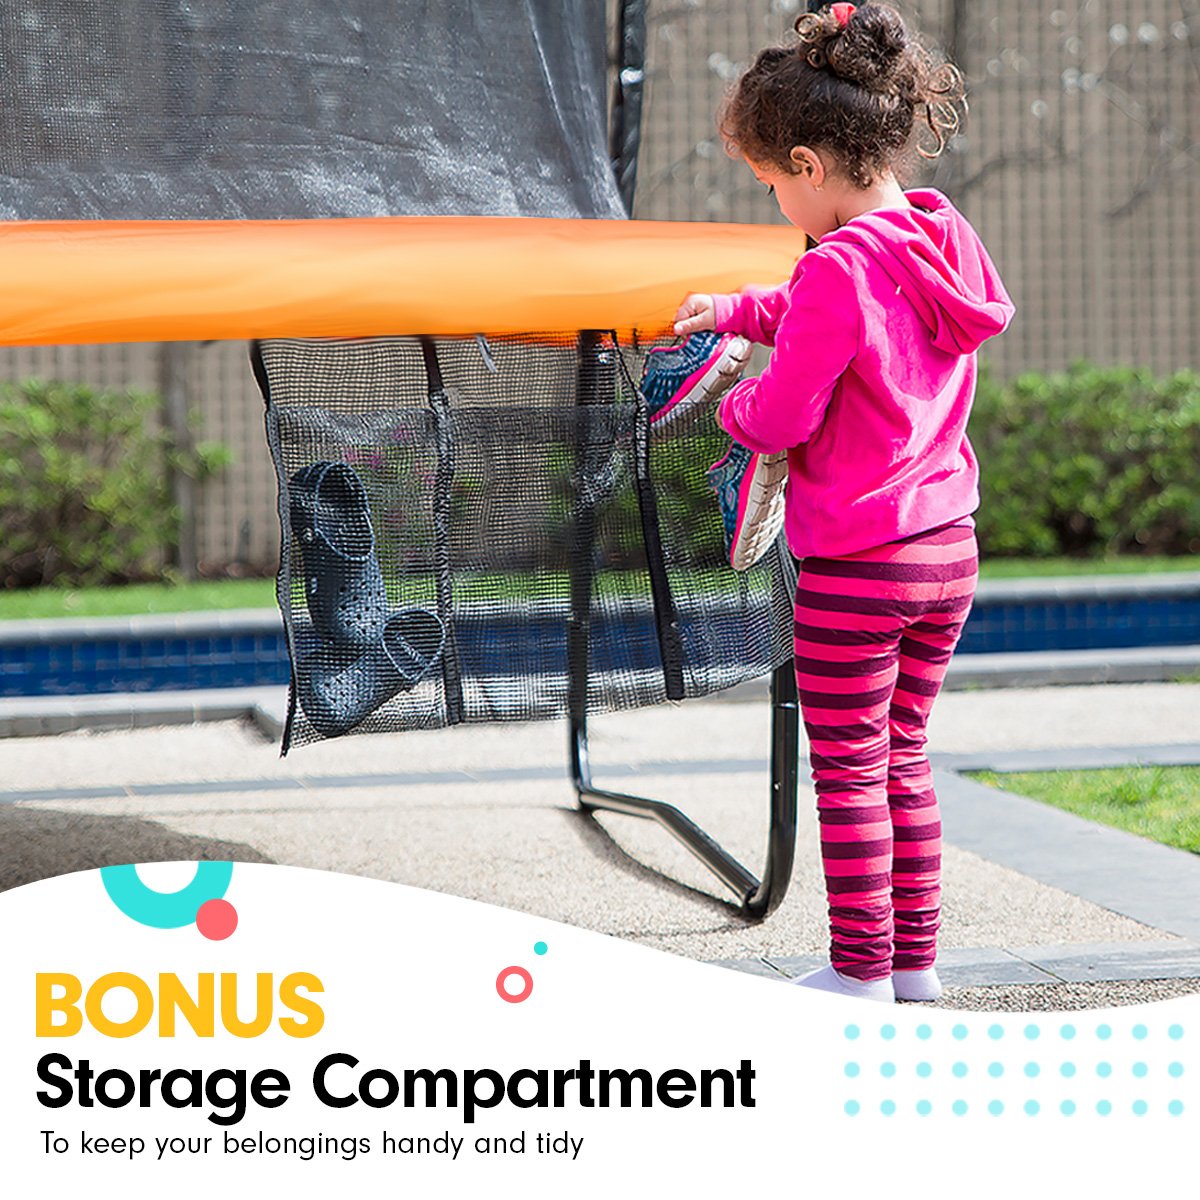 Kahuna 8ft Outdoor Orange Trampoline For Kids And Children Suited For Fitness Exercise Gymnastics With Safety Enclosure Basketball Hoop Set - SILBERSHELL